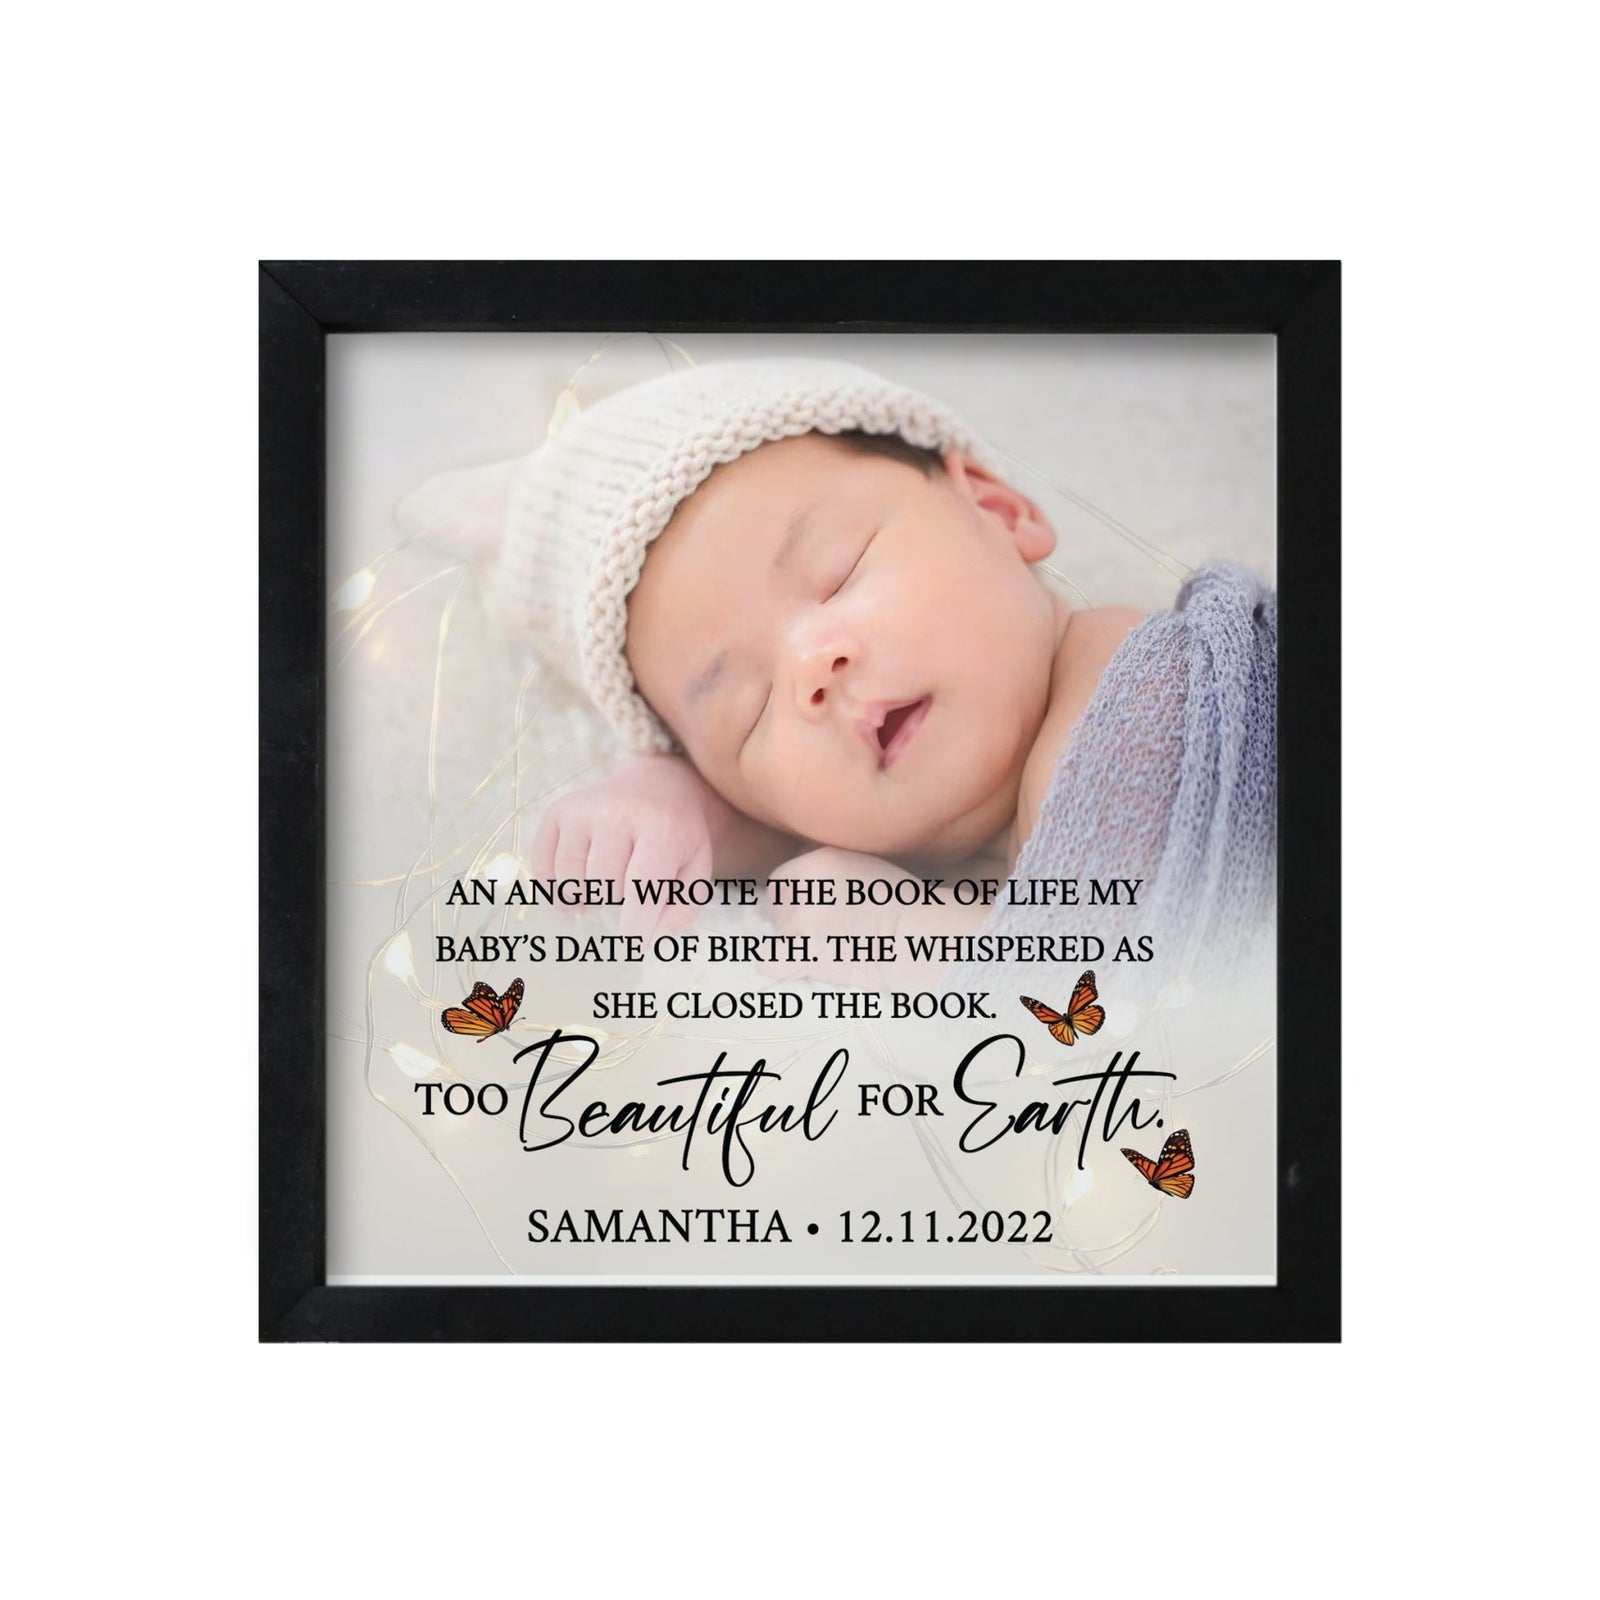 Personalized Memorial Black Framed Shadow Box With Lights Sympathy Gift & Wall Décor - An Angel Wrote A Book - LifeSong Milestones